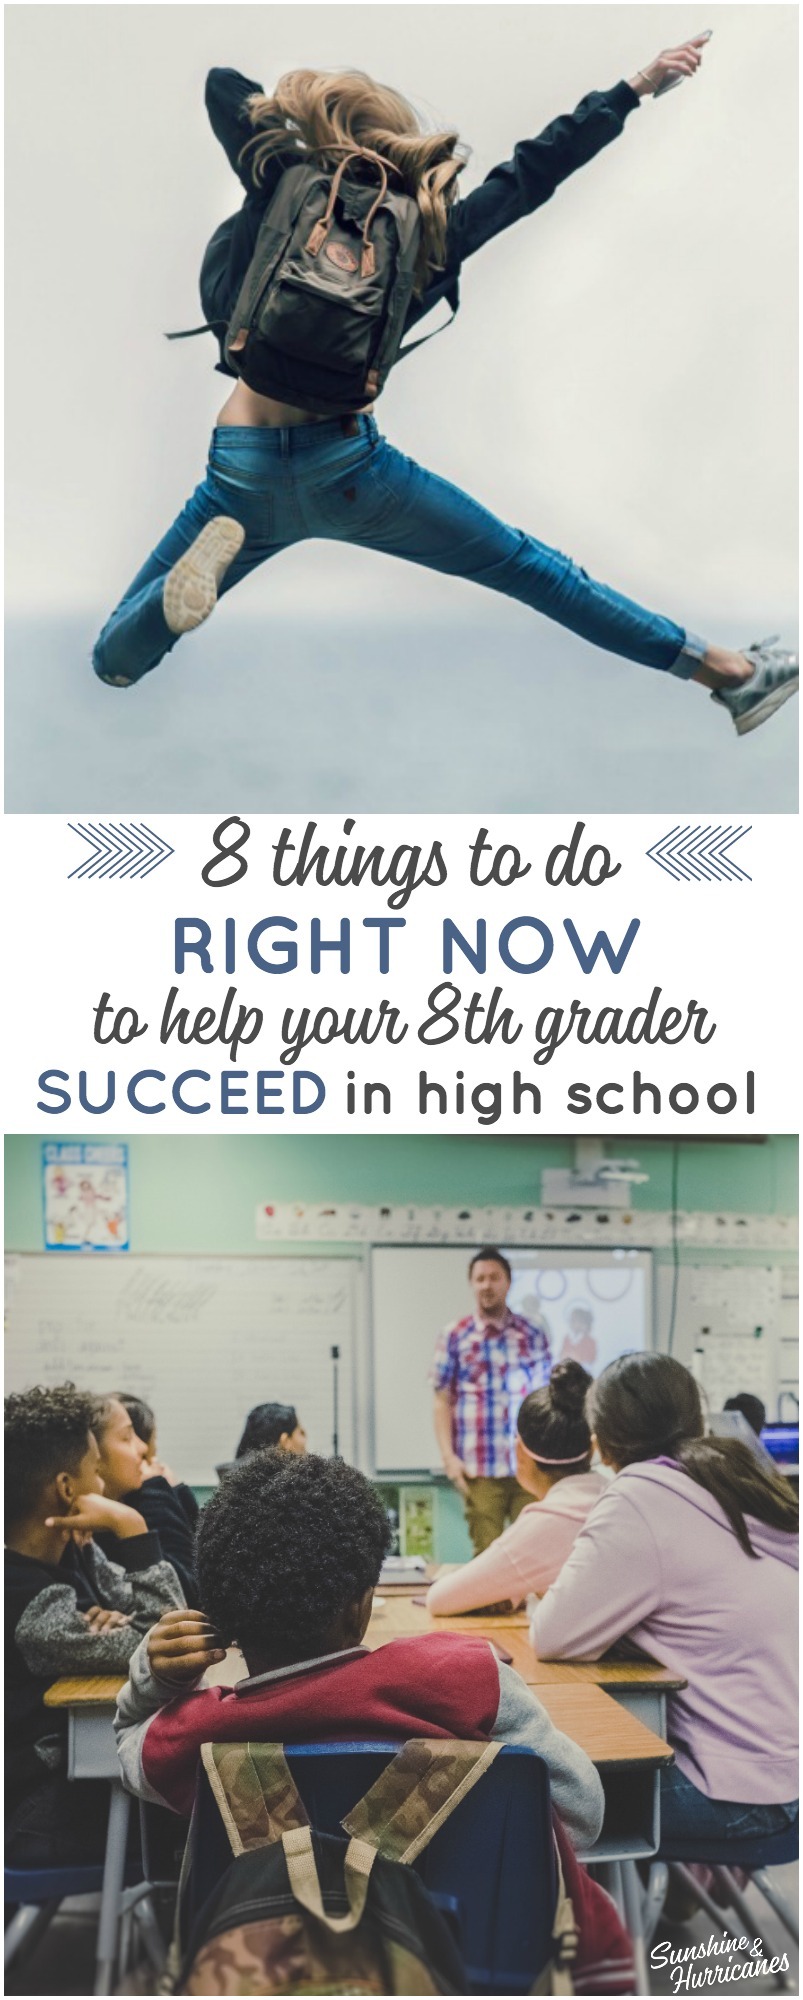 Eight ways to help your eighth grader RIGHT NOW so they can succeed in high school.